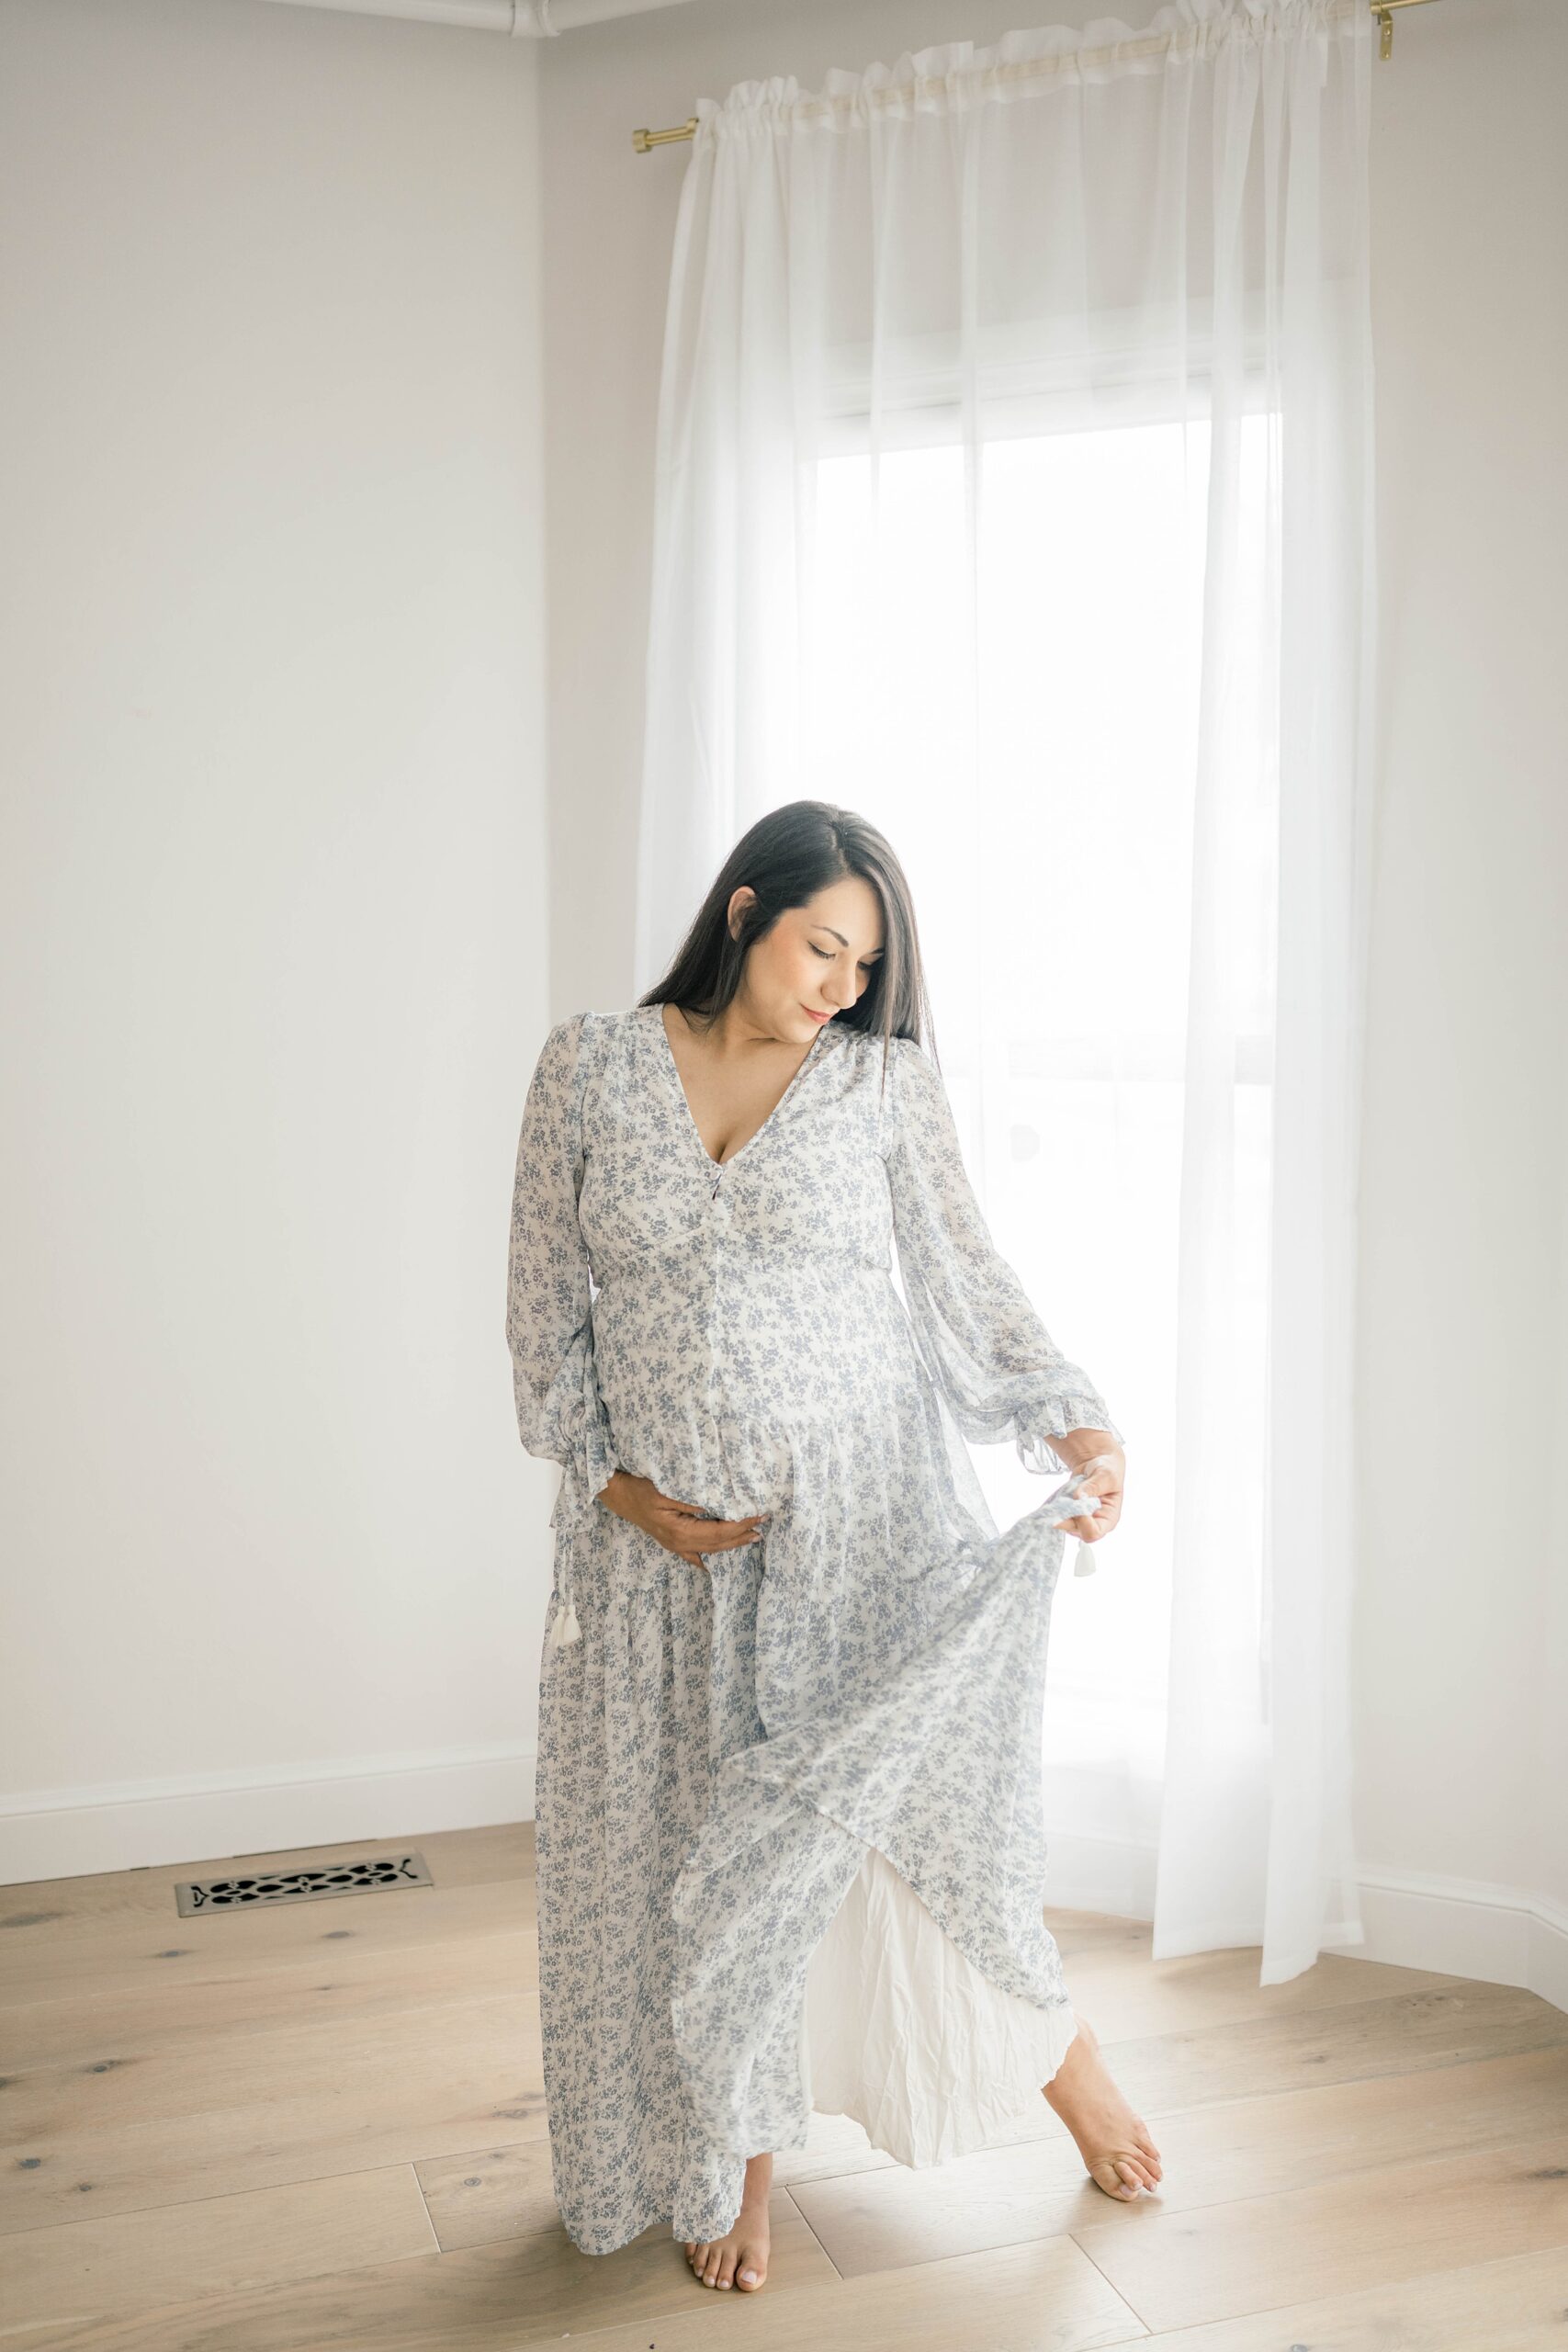 A mom to be walks through a studio playing with her floral print dress and holding the bump thanks to oklahoma city fertility clinic